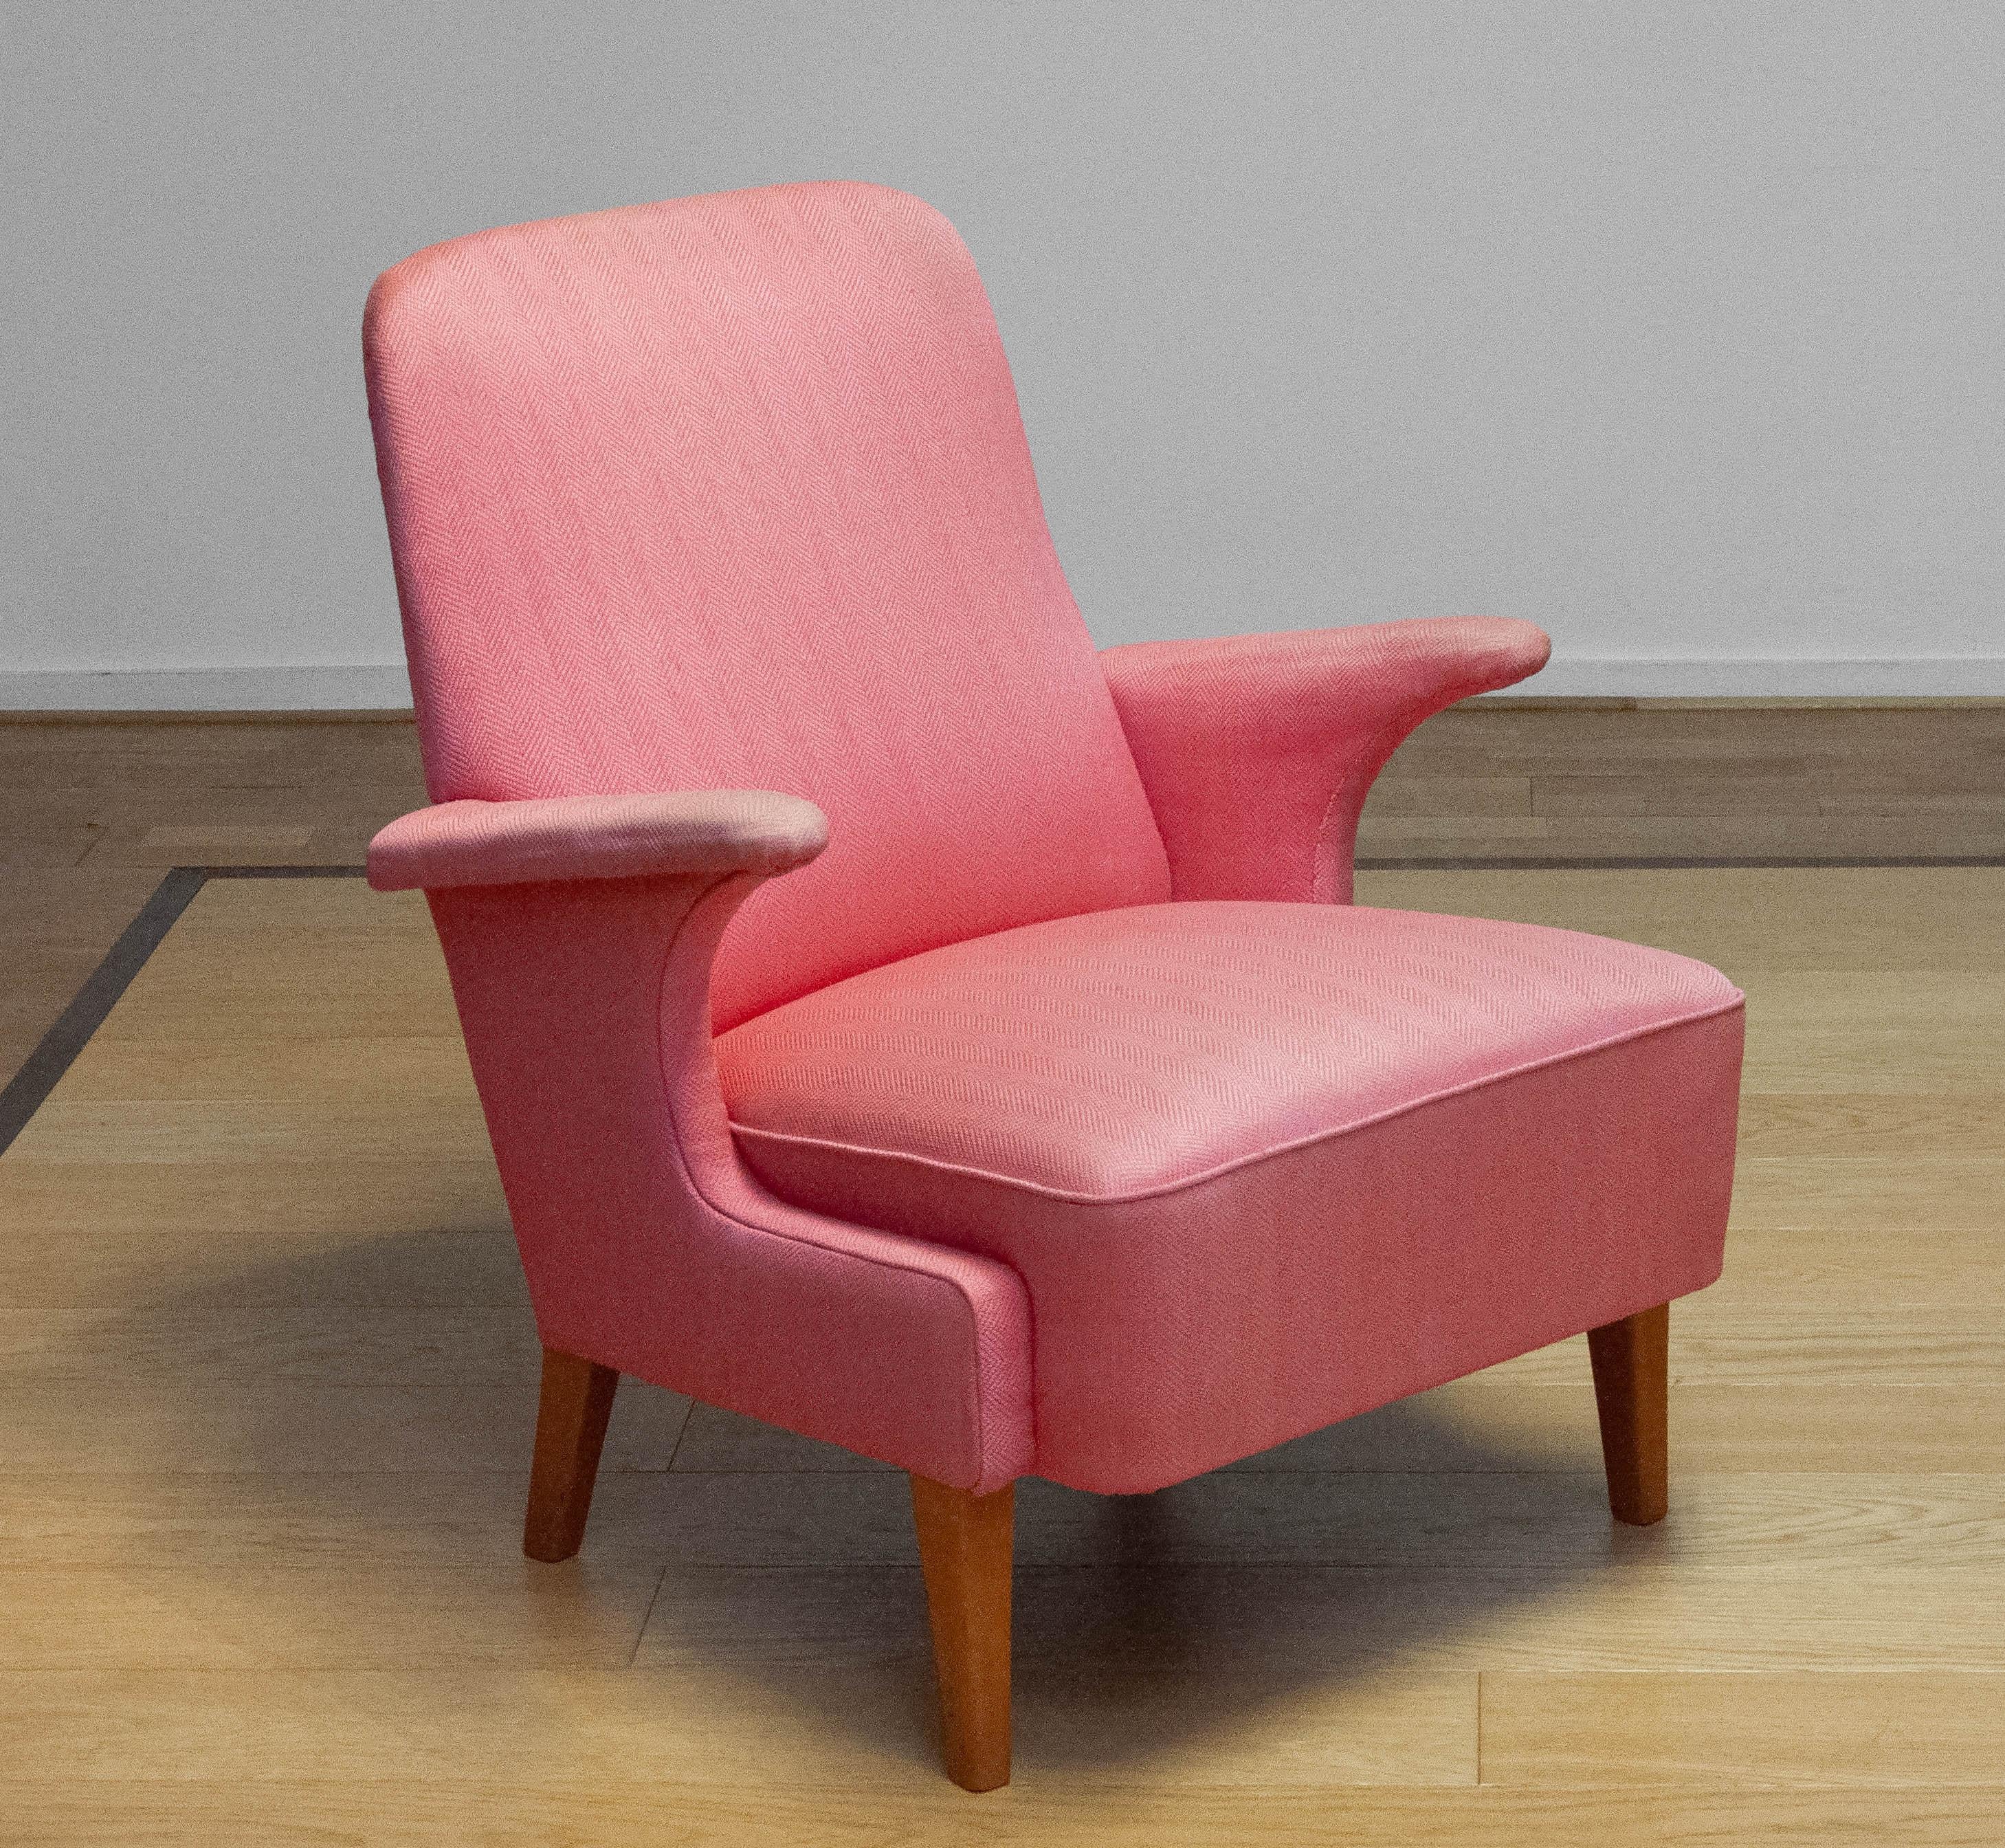 Beautiful designed armchair by Dux of Sweden. The armchair is upholstered with powder pink wool upholstery fishbone patterned.
This chair come out of the rubble spring series, ( Dubble seat springs for extra comfort )
The chair stil sits very